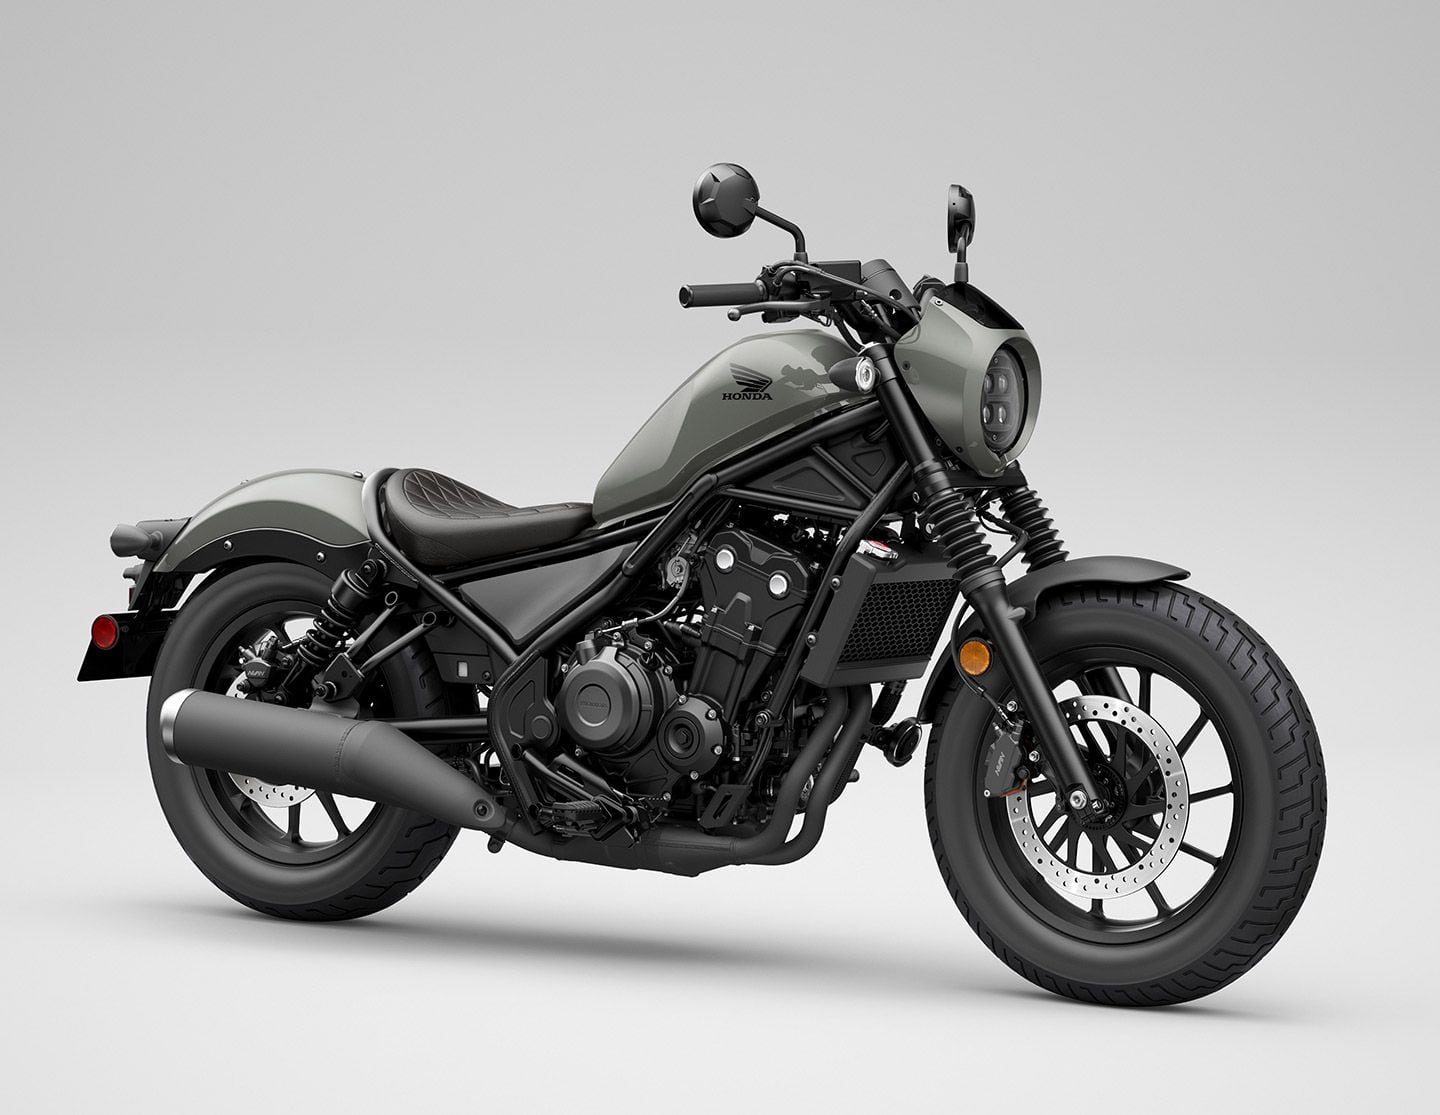 The Rebel 500 SE ABS returns for 2024 as well, but with a new-for-this-year Pearl Gray color.